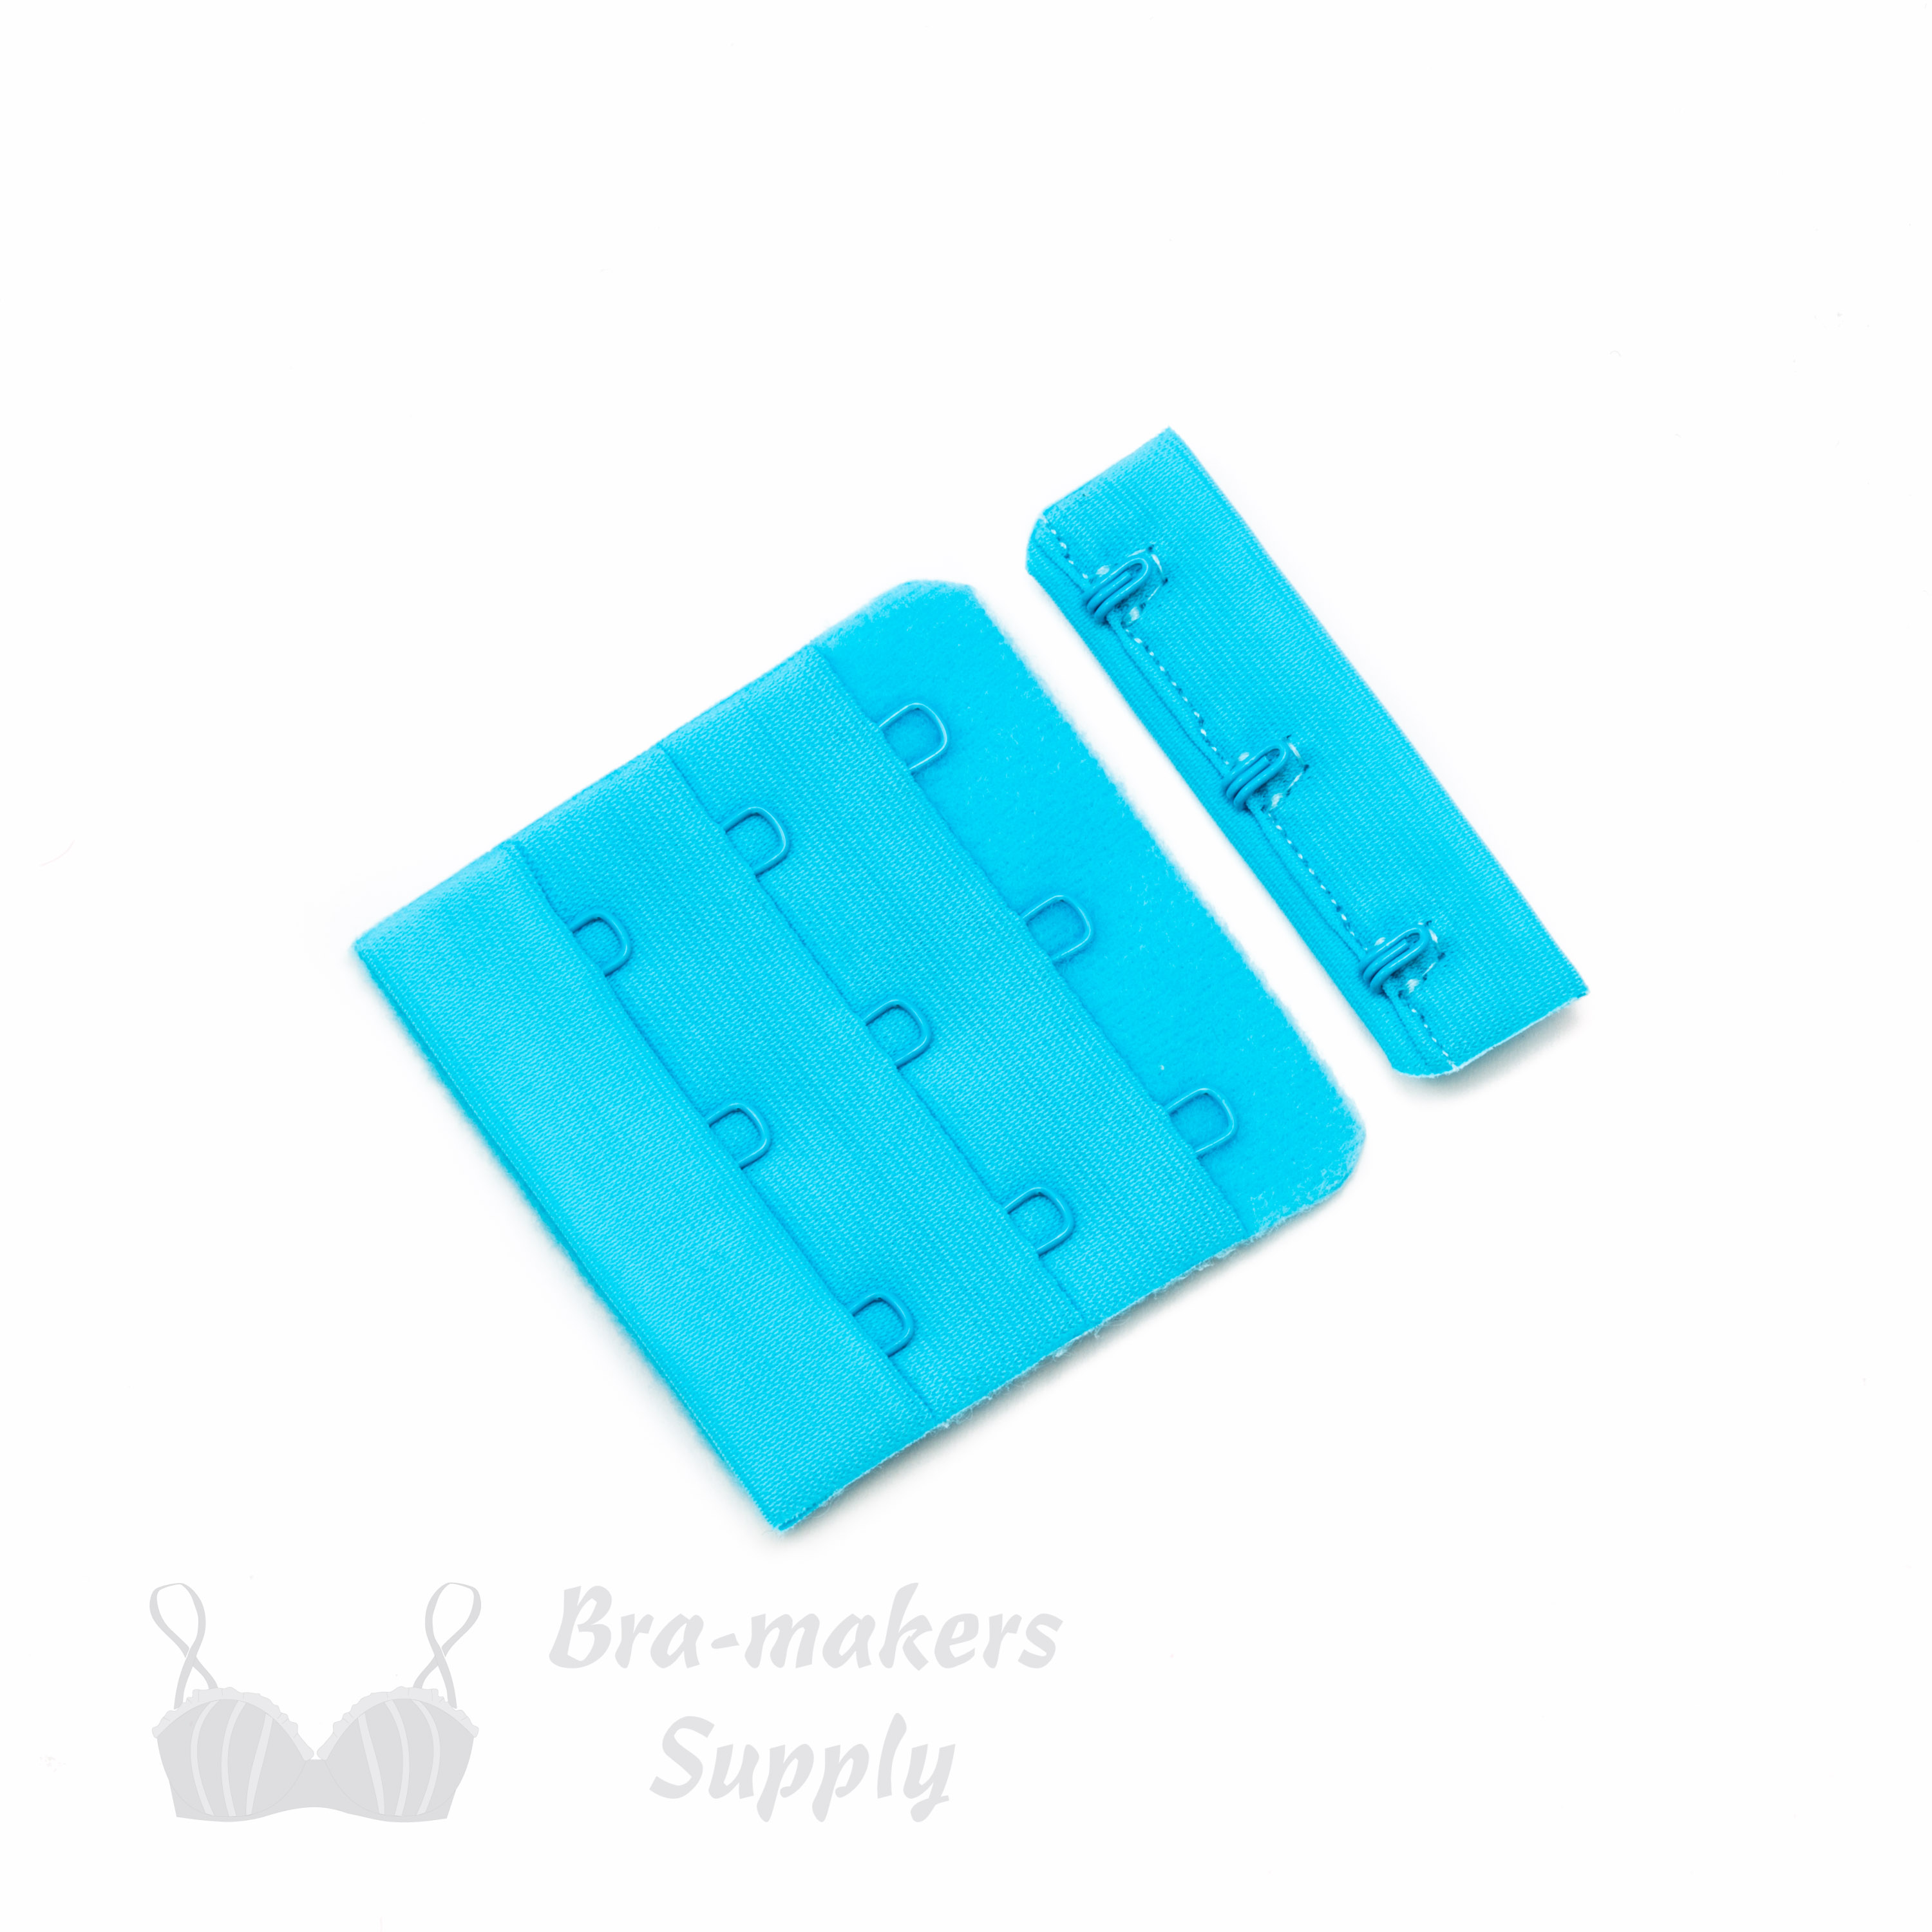 3x3 bra hook and eye turquoise HS-33 or 3x3 hook and eye back closures backelor button Pantone 14-4522 from Bra-Makers Supply front shown